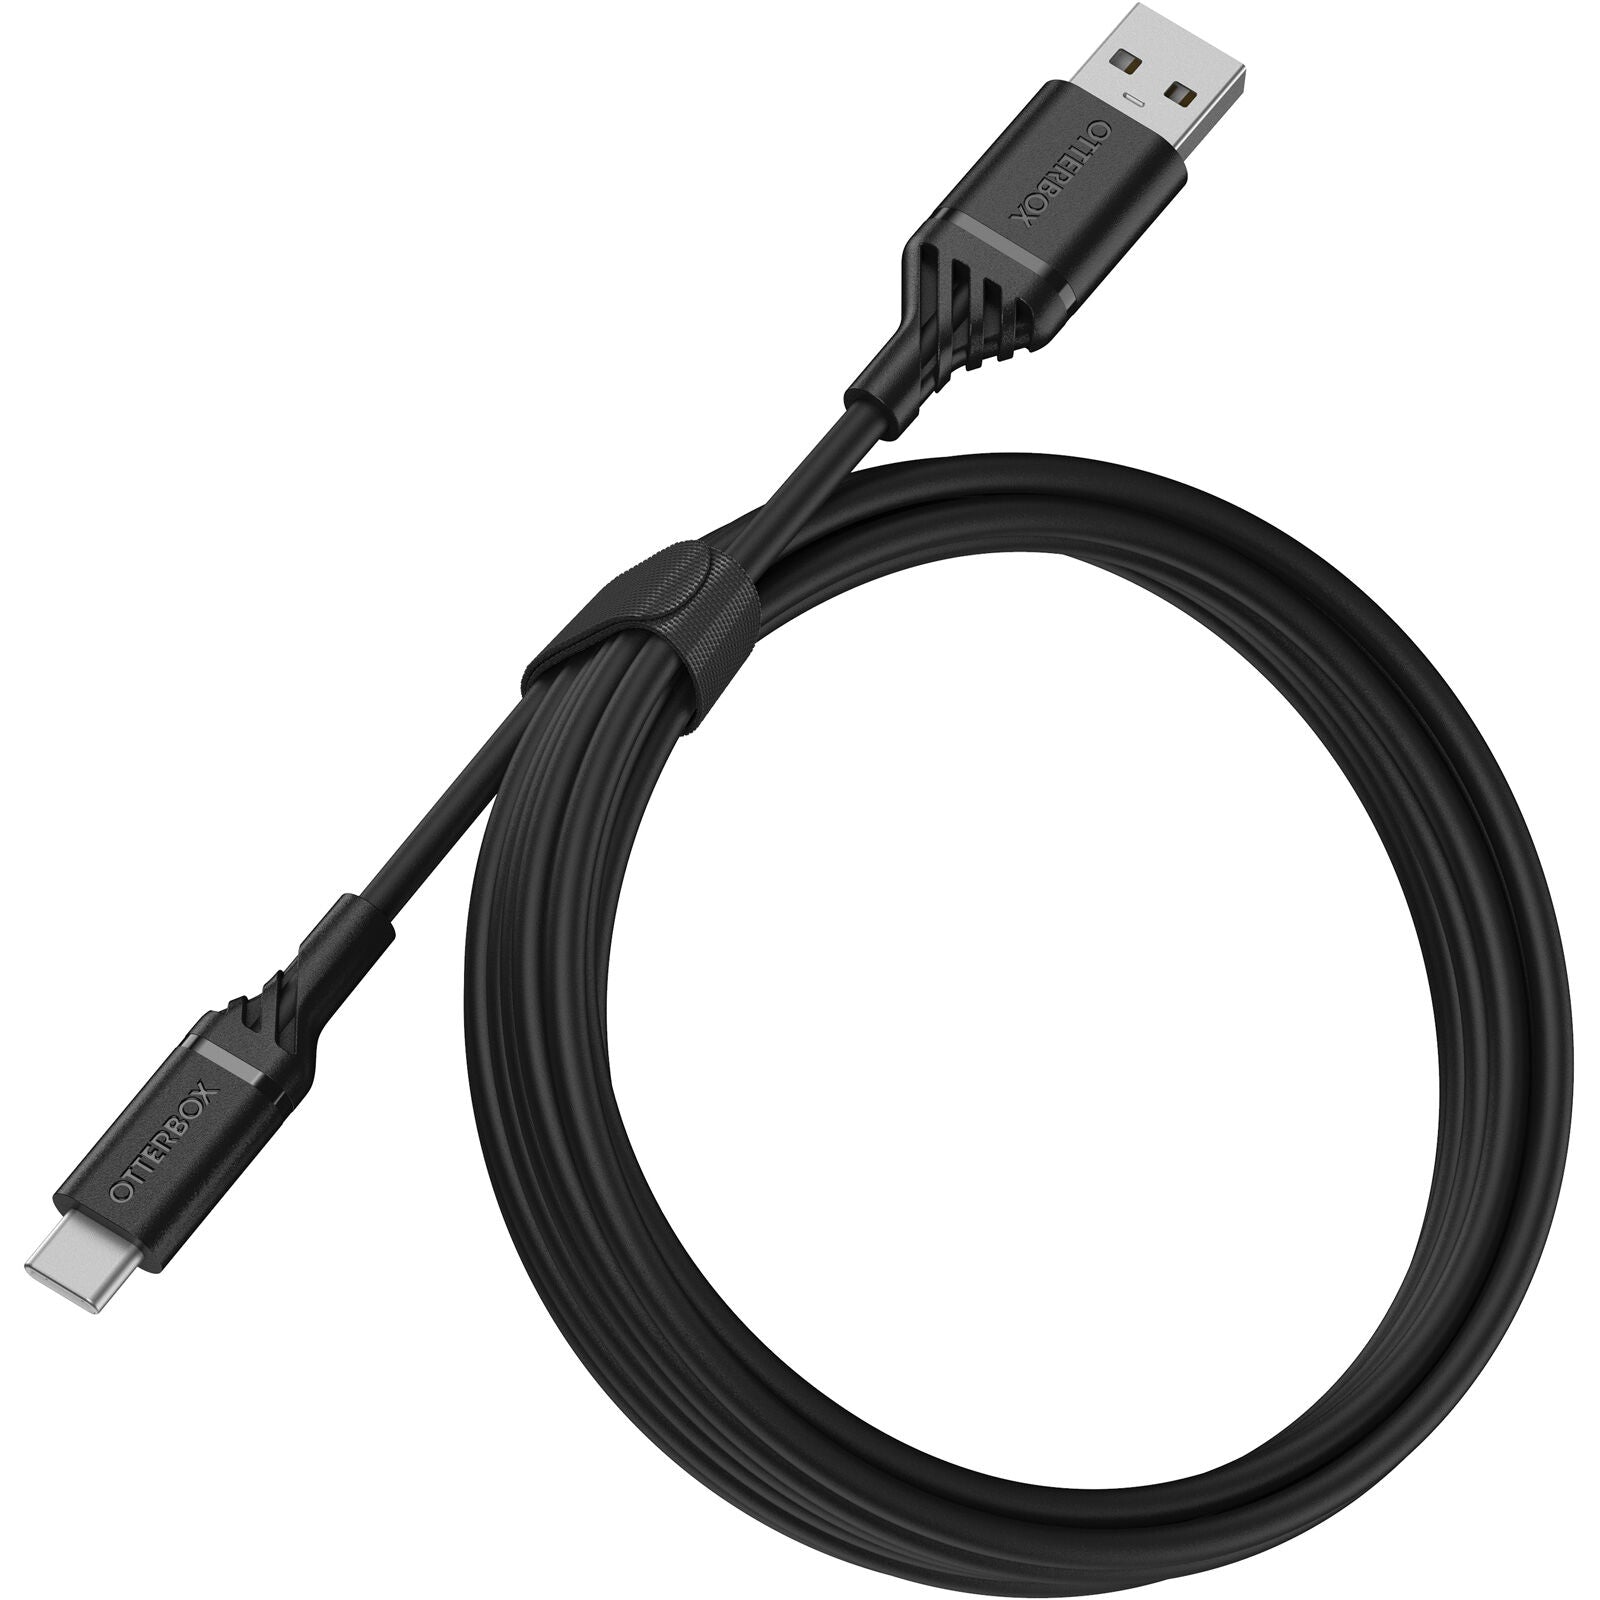 OtterBox USB-C to USB-A Cable (2M) - Black (78-52659), USB 2.0, 3 AMPS (60W), Bend/Flex-Tested 3K Times, Durable & Flexible, 480 Mbps Transfer Rate